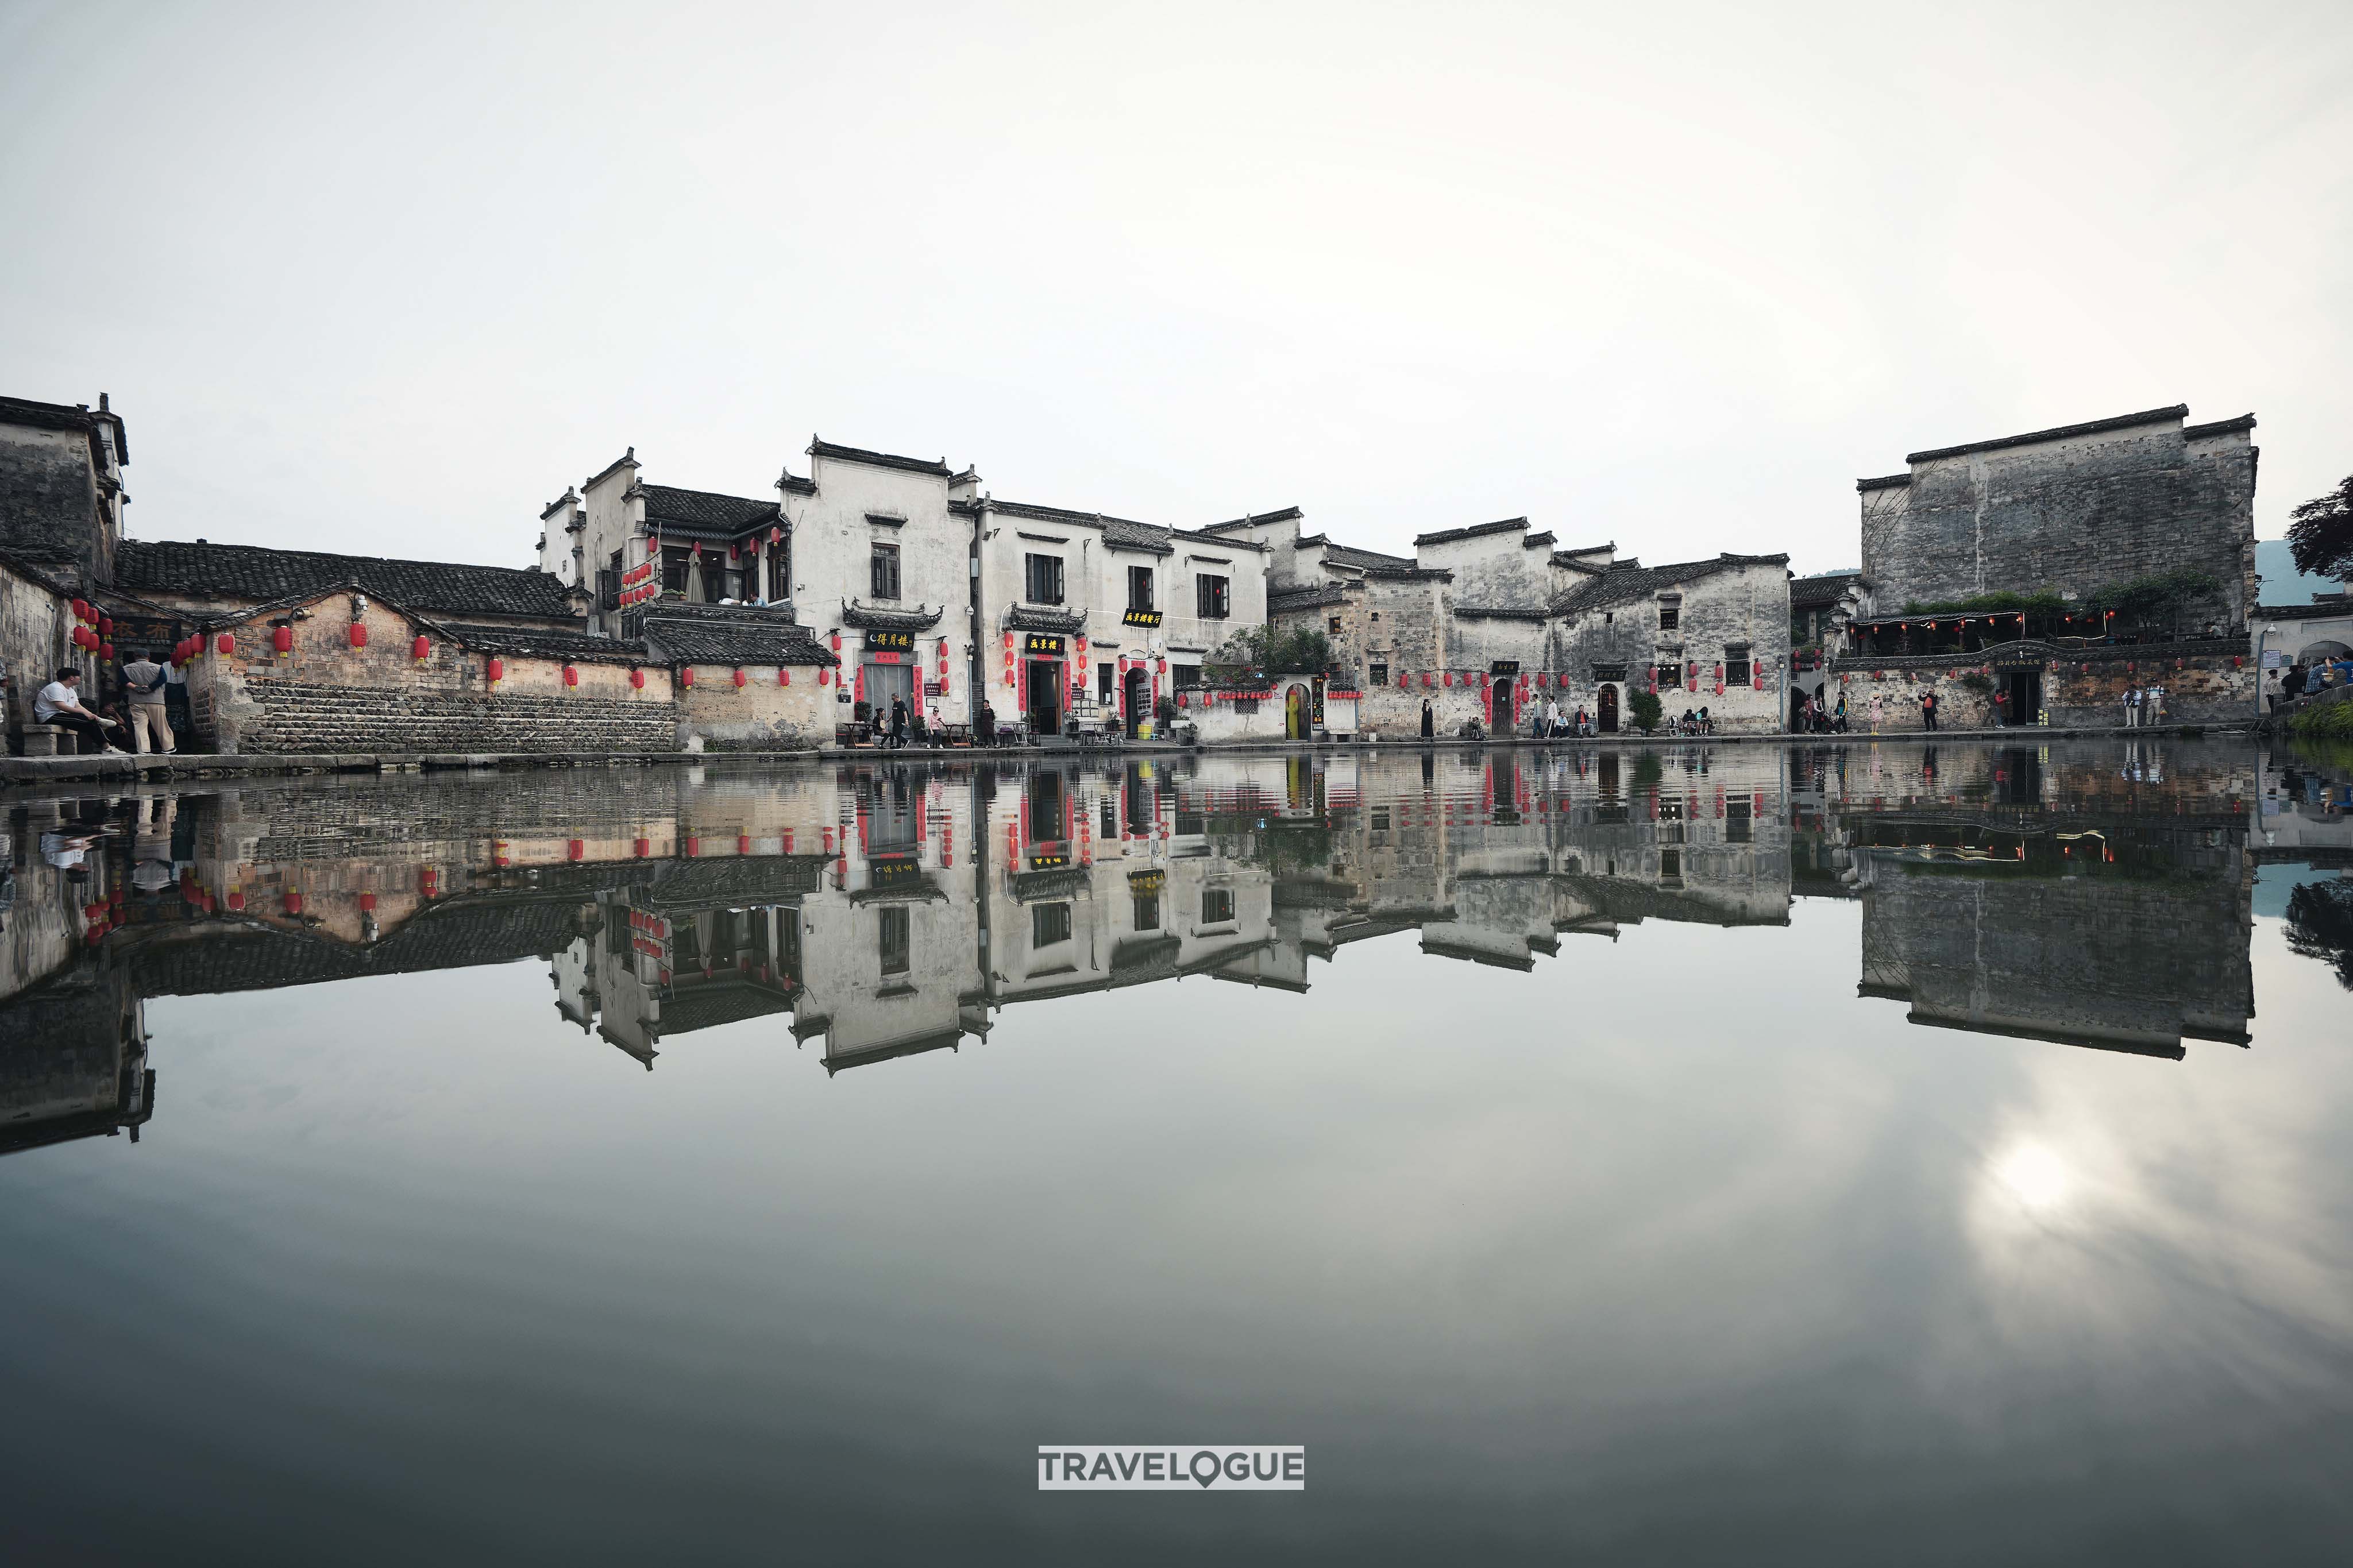 An unobstructed view of Hongcun Village, east China's Anhui Province. /CGTN